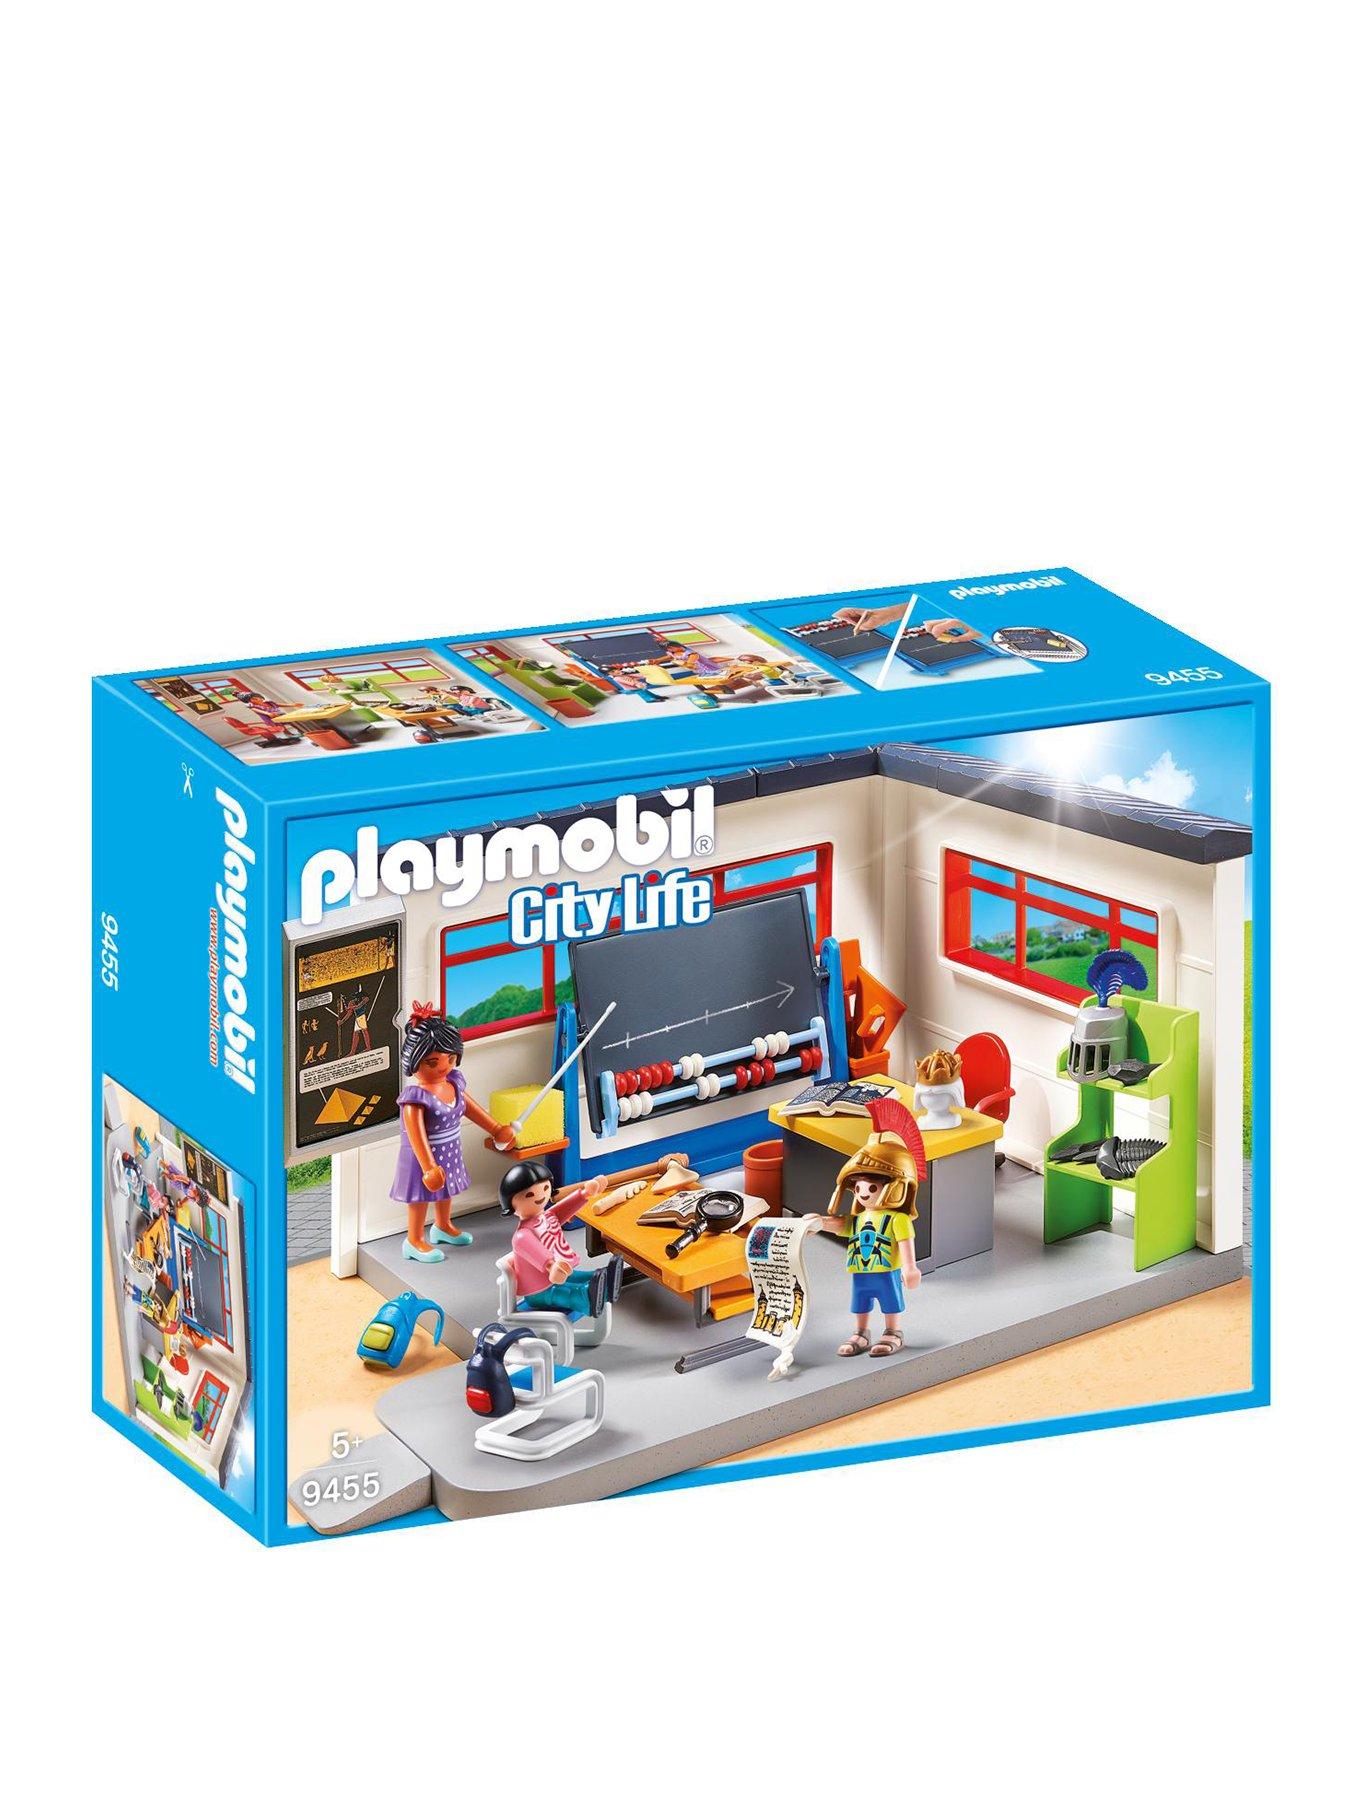 5 6 Years Toys Wwwlittlewoodscom - lets go for snow boarding roblox jeep playmobil playset